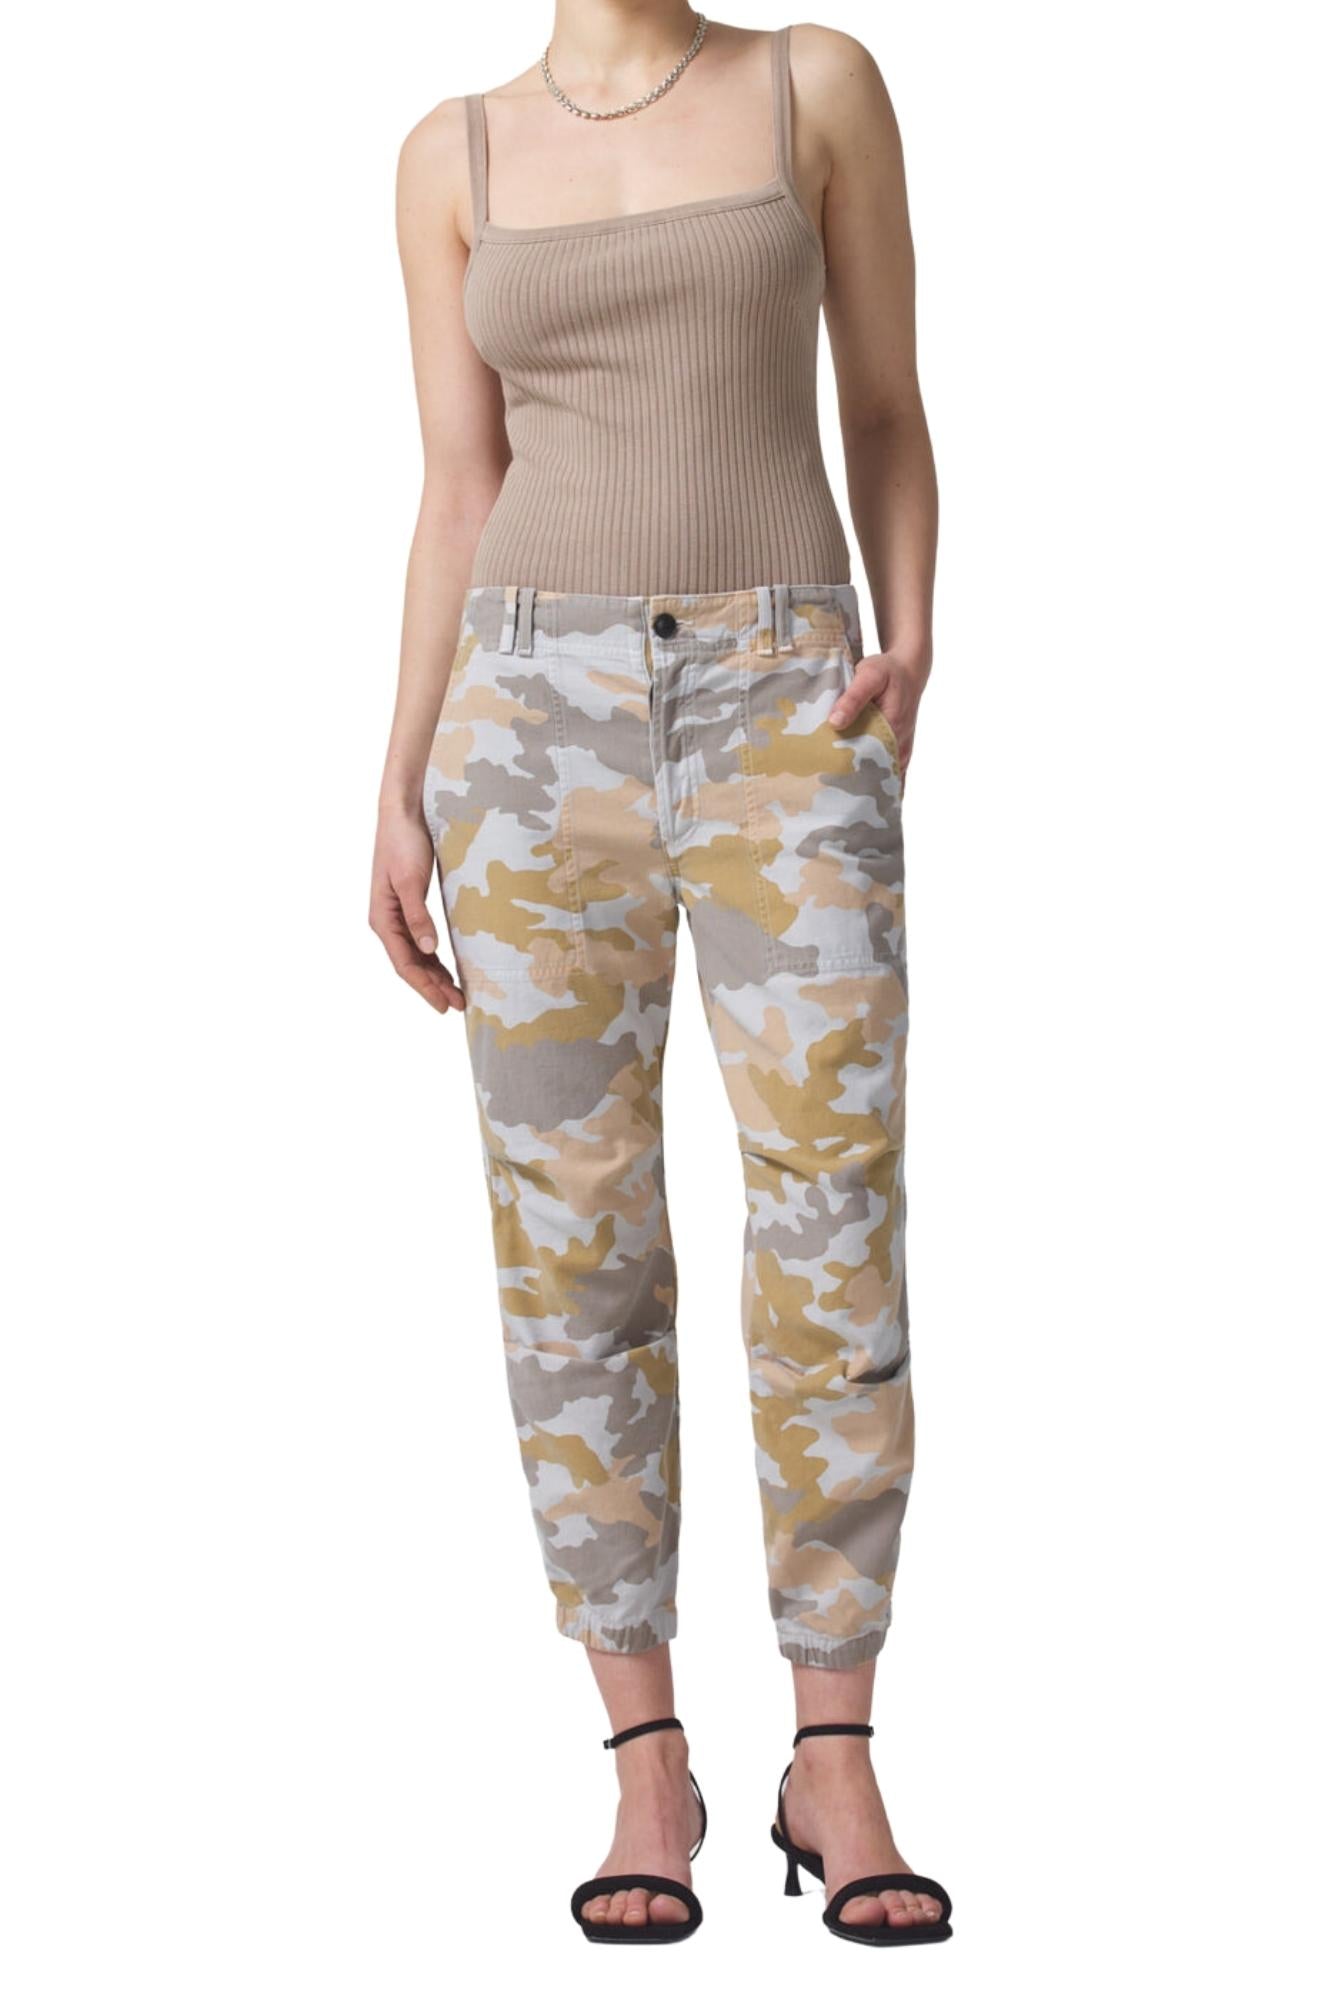 AGNI-UTILITY-TROUSER-IN-PRINT-PINK-CAMO-SUNSET-HIDEAWAY-